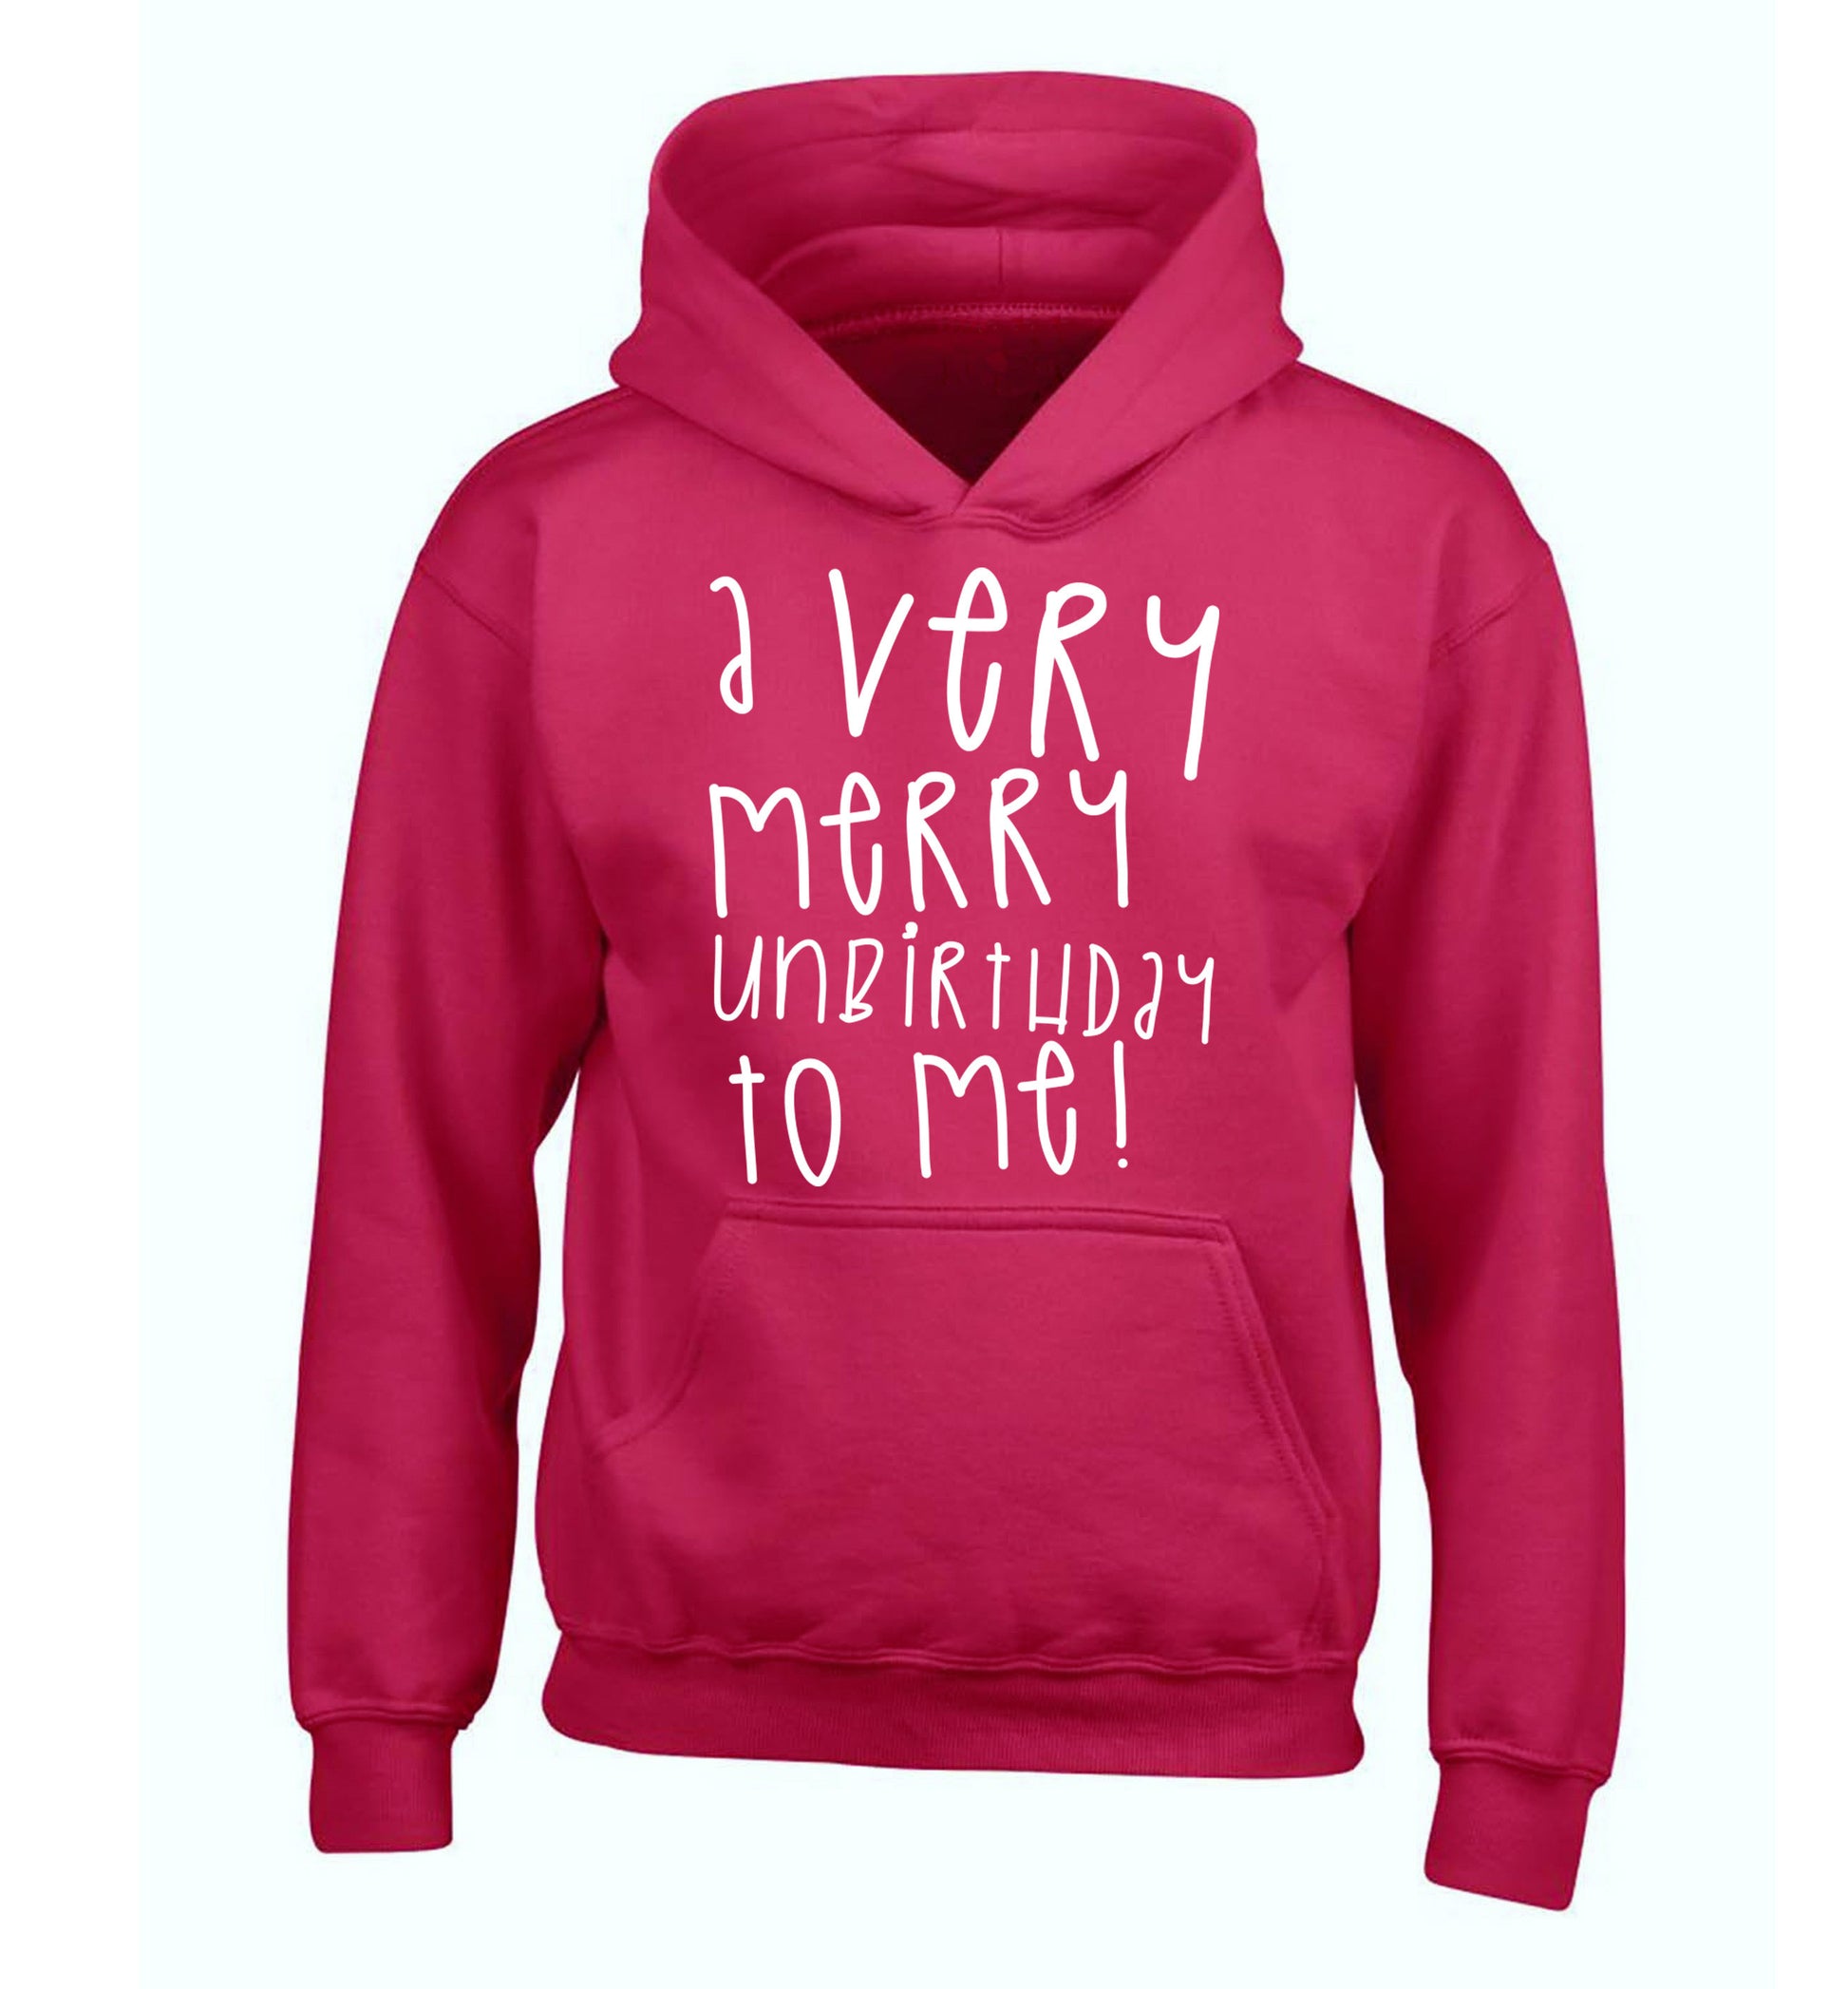 A very merry unbirthday to me! children's pink hoodie 12-14 Years